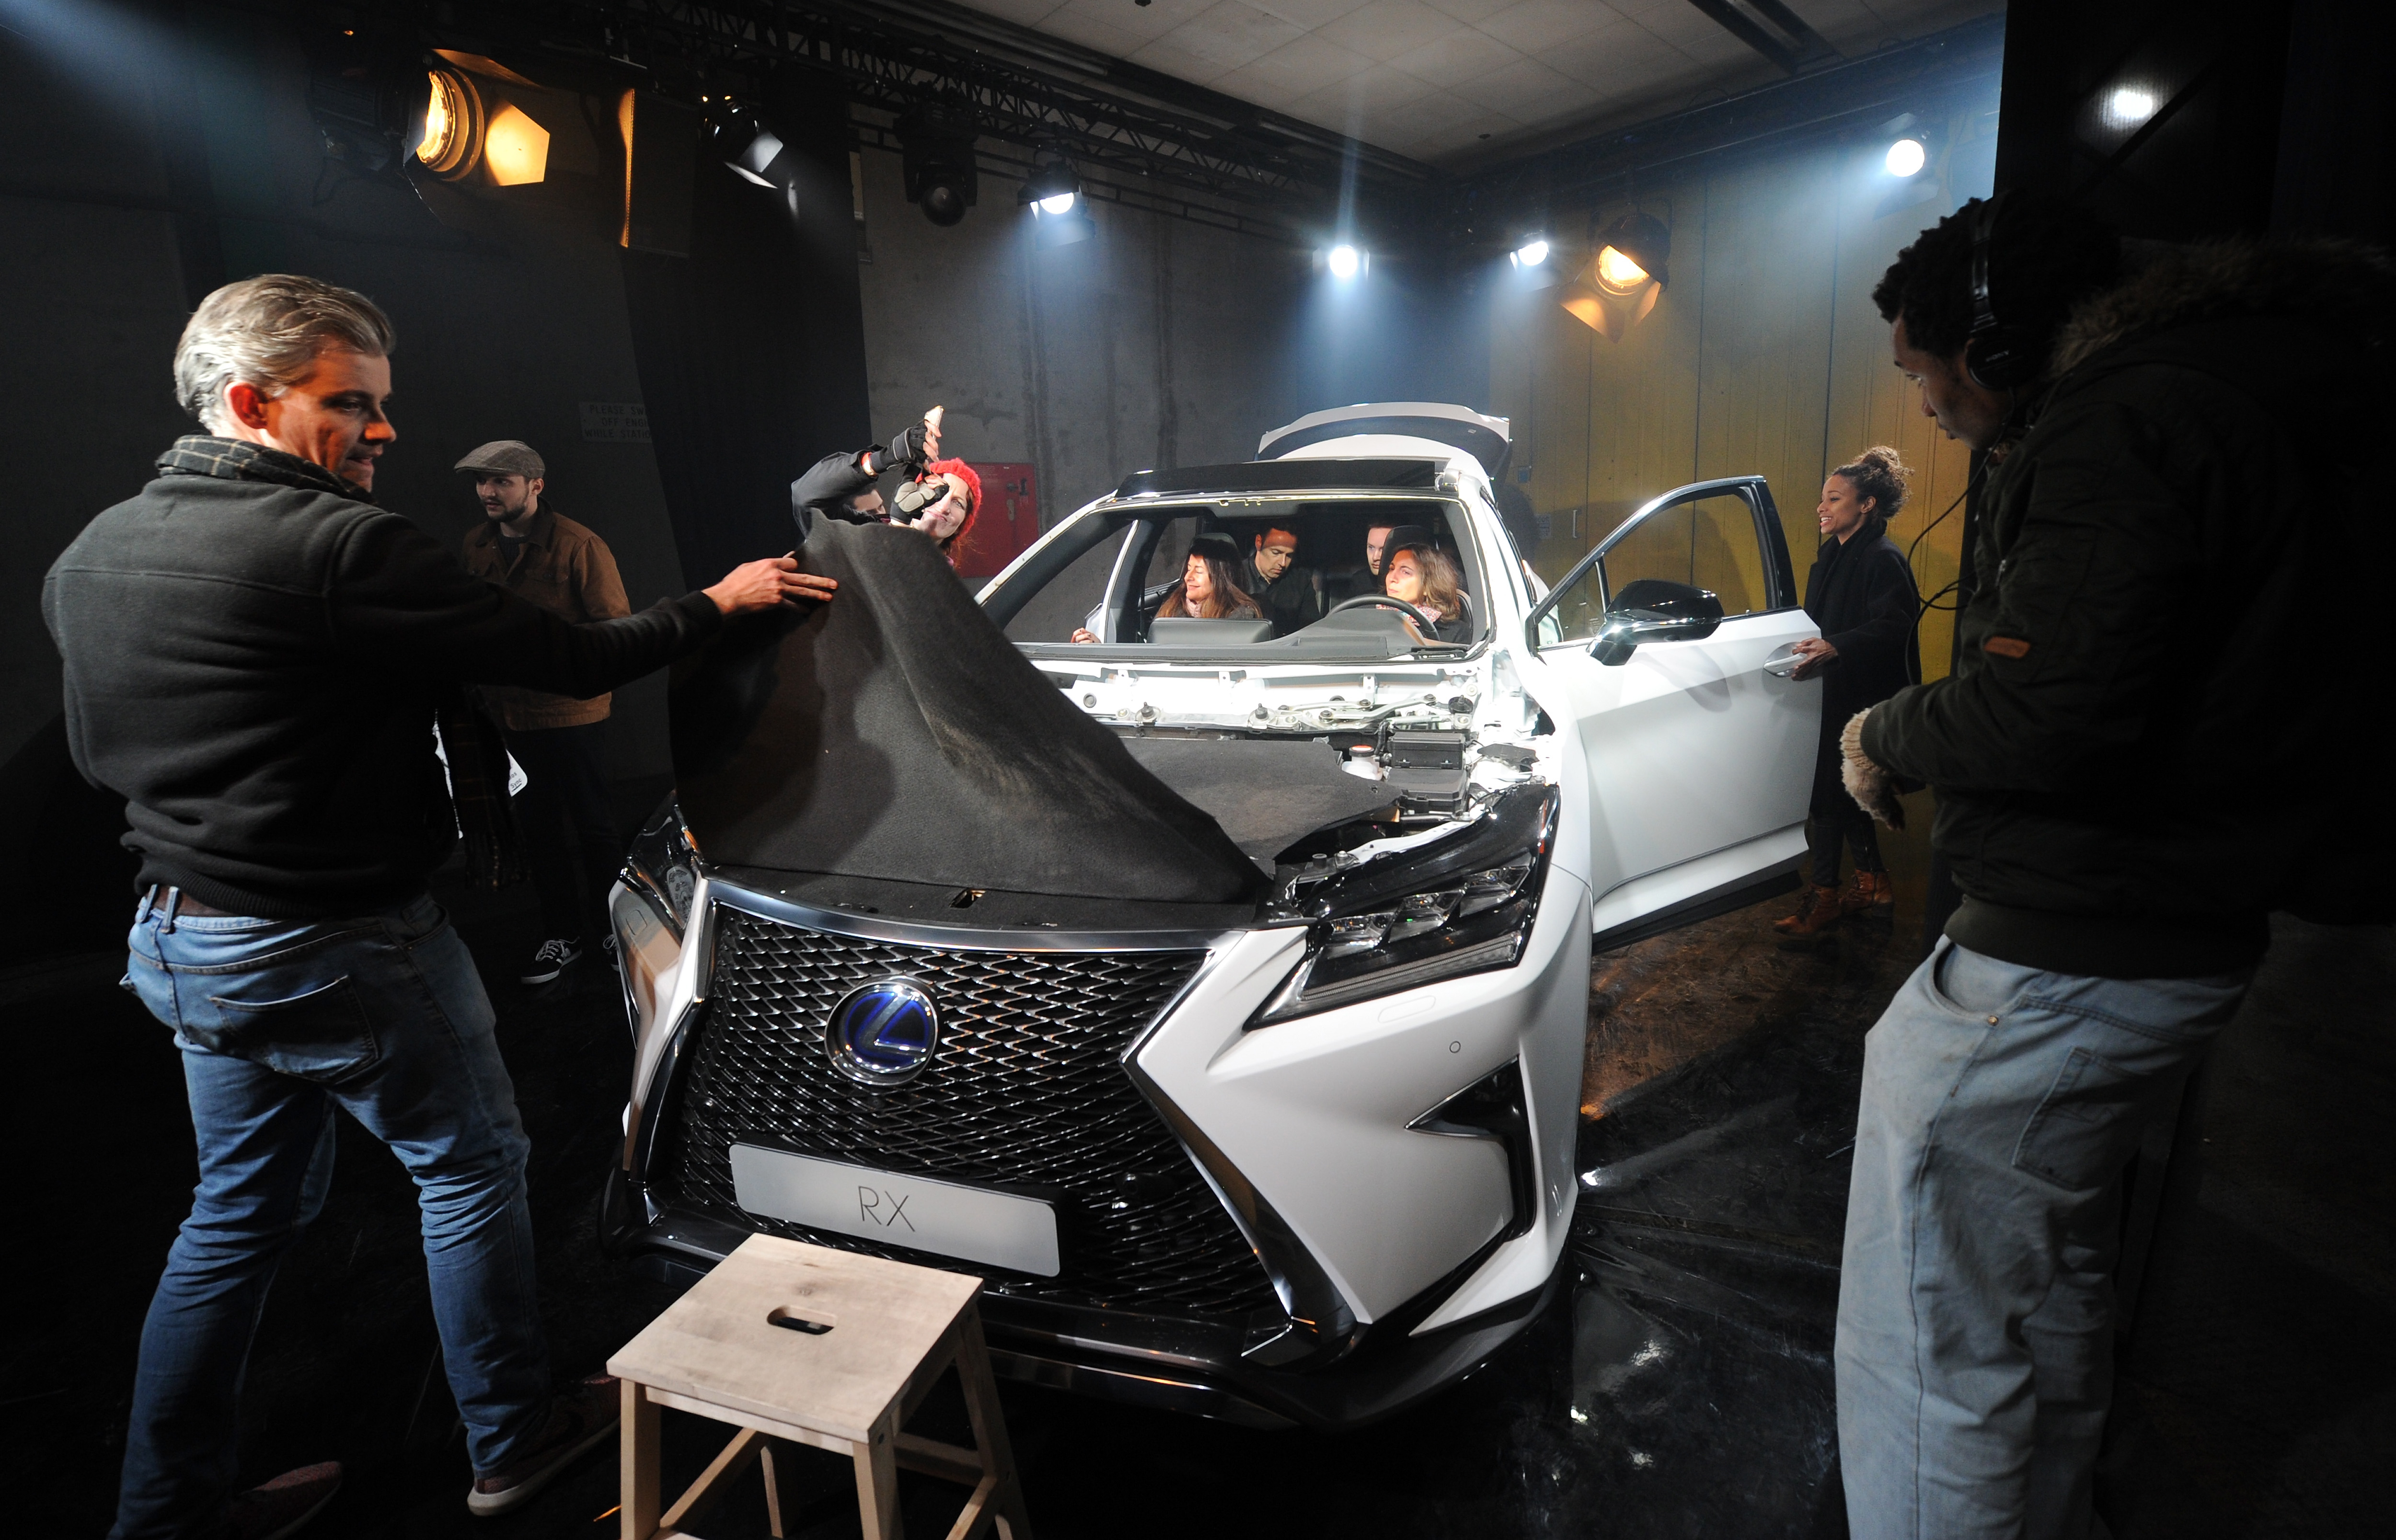 LONDON, ENGLAND - FEBRUARY 09: Guests enjoy the new immersive theatre experience, The Life RX, a performance celebrating the launch of the boldly designed new Lexus RX on February 9, 2016 in London, England. (Photo by Stuart C. Wilson/Getty Images for Lexus)